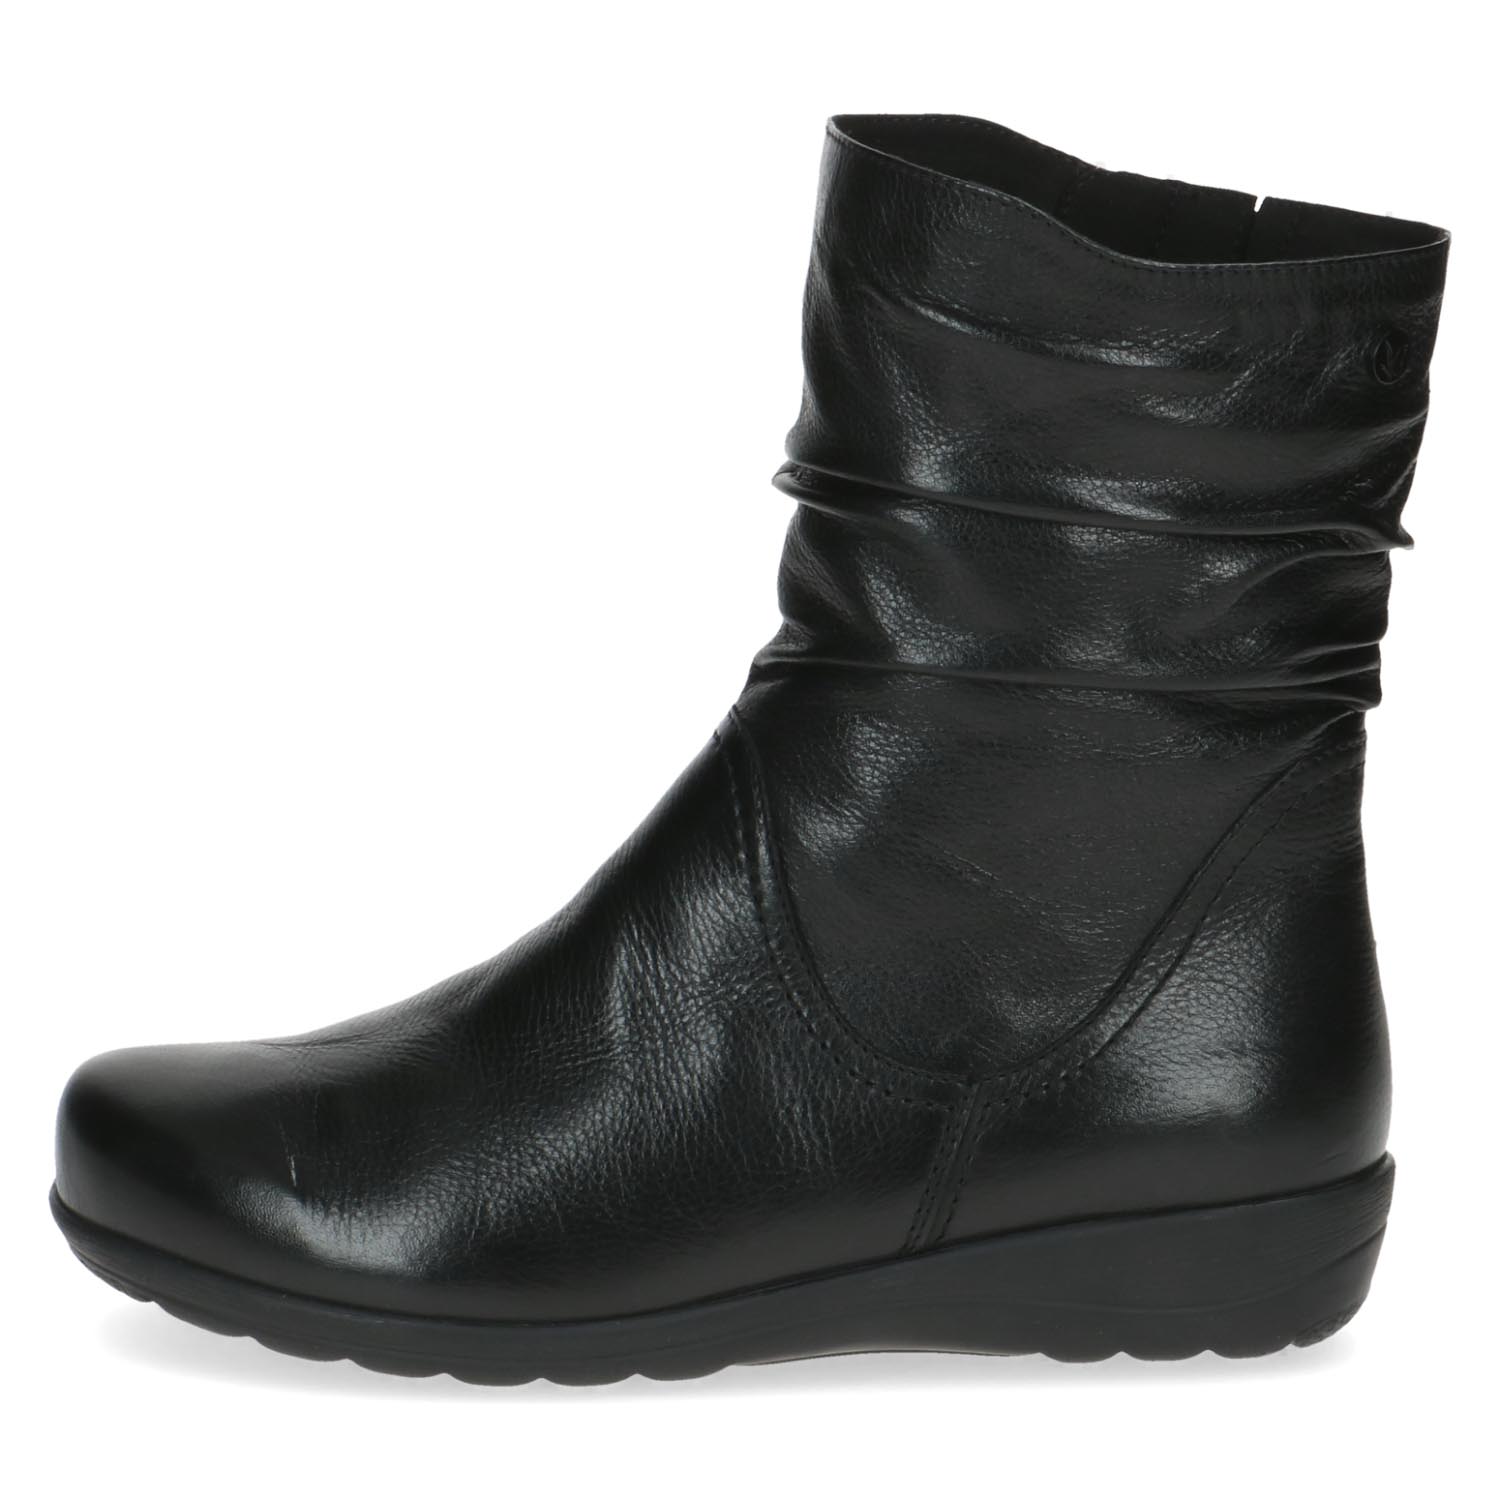 Front view of the Caprice Soft Leather Casual Ankle Boot.